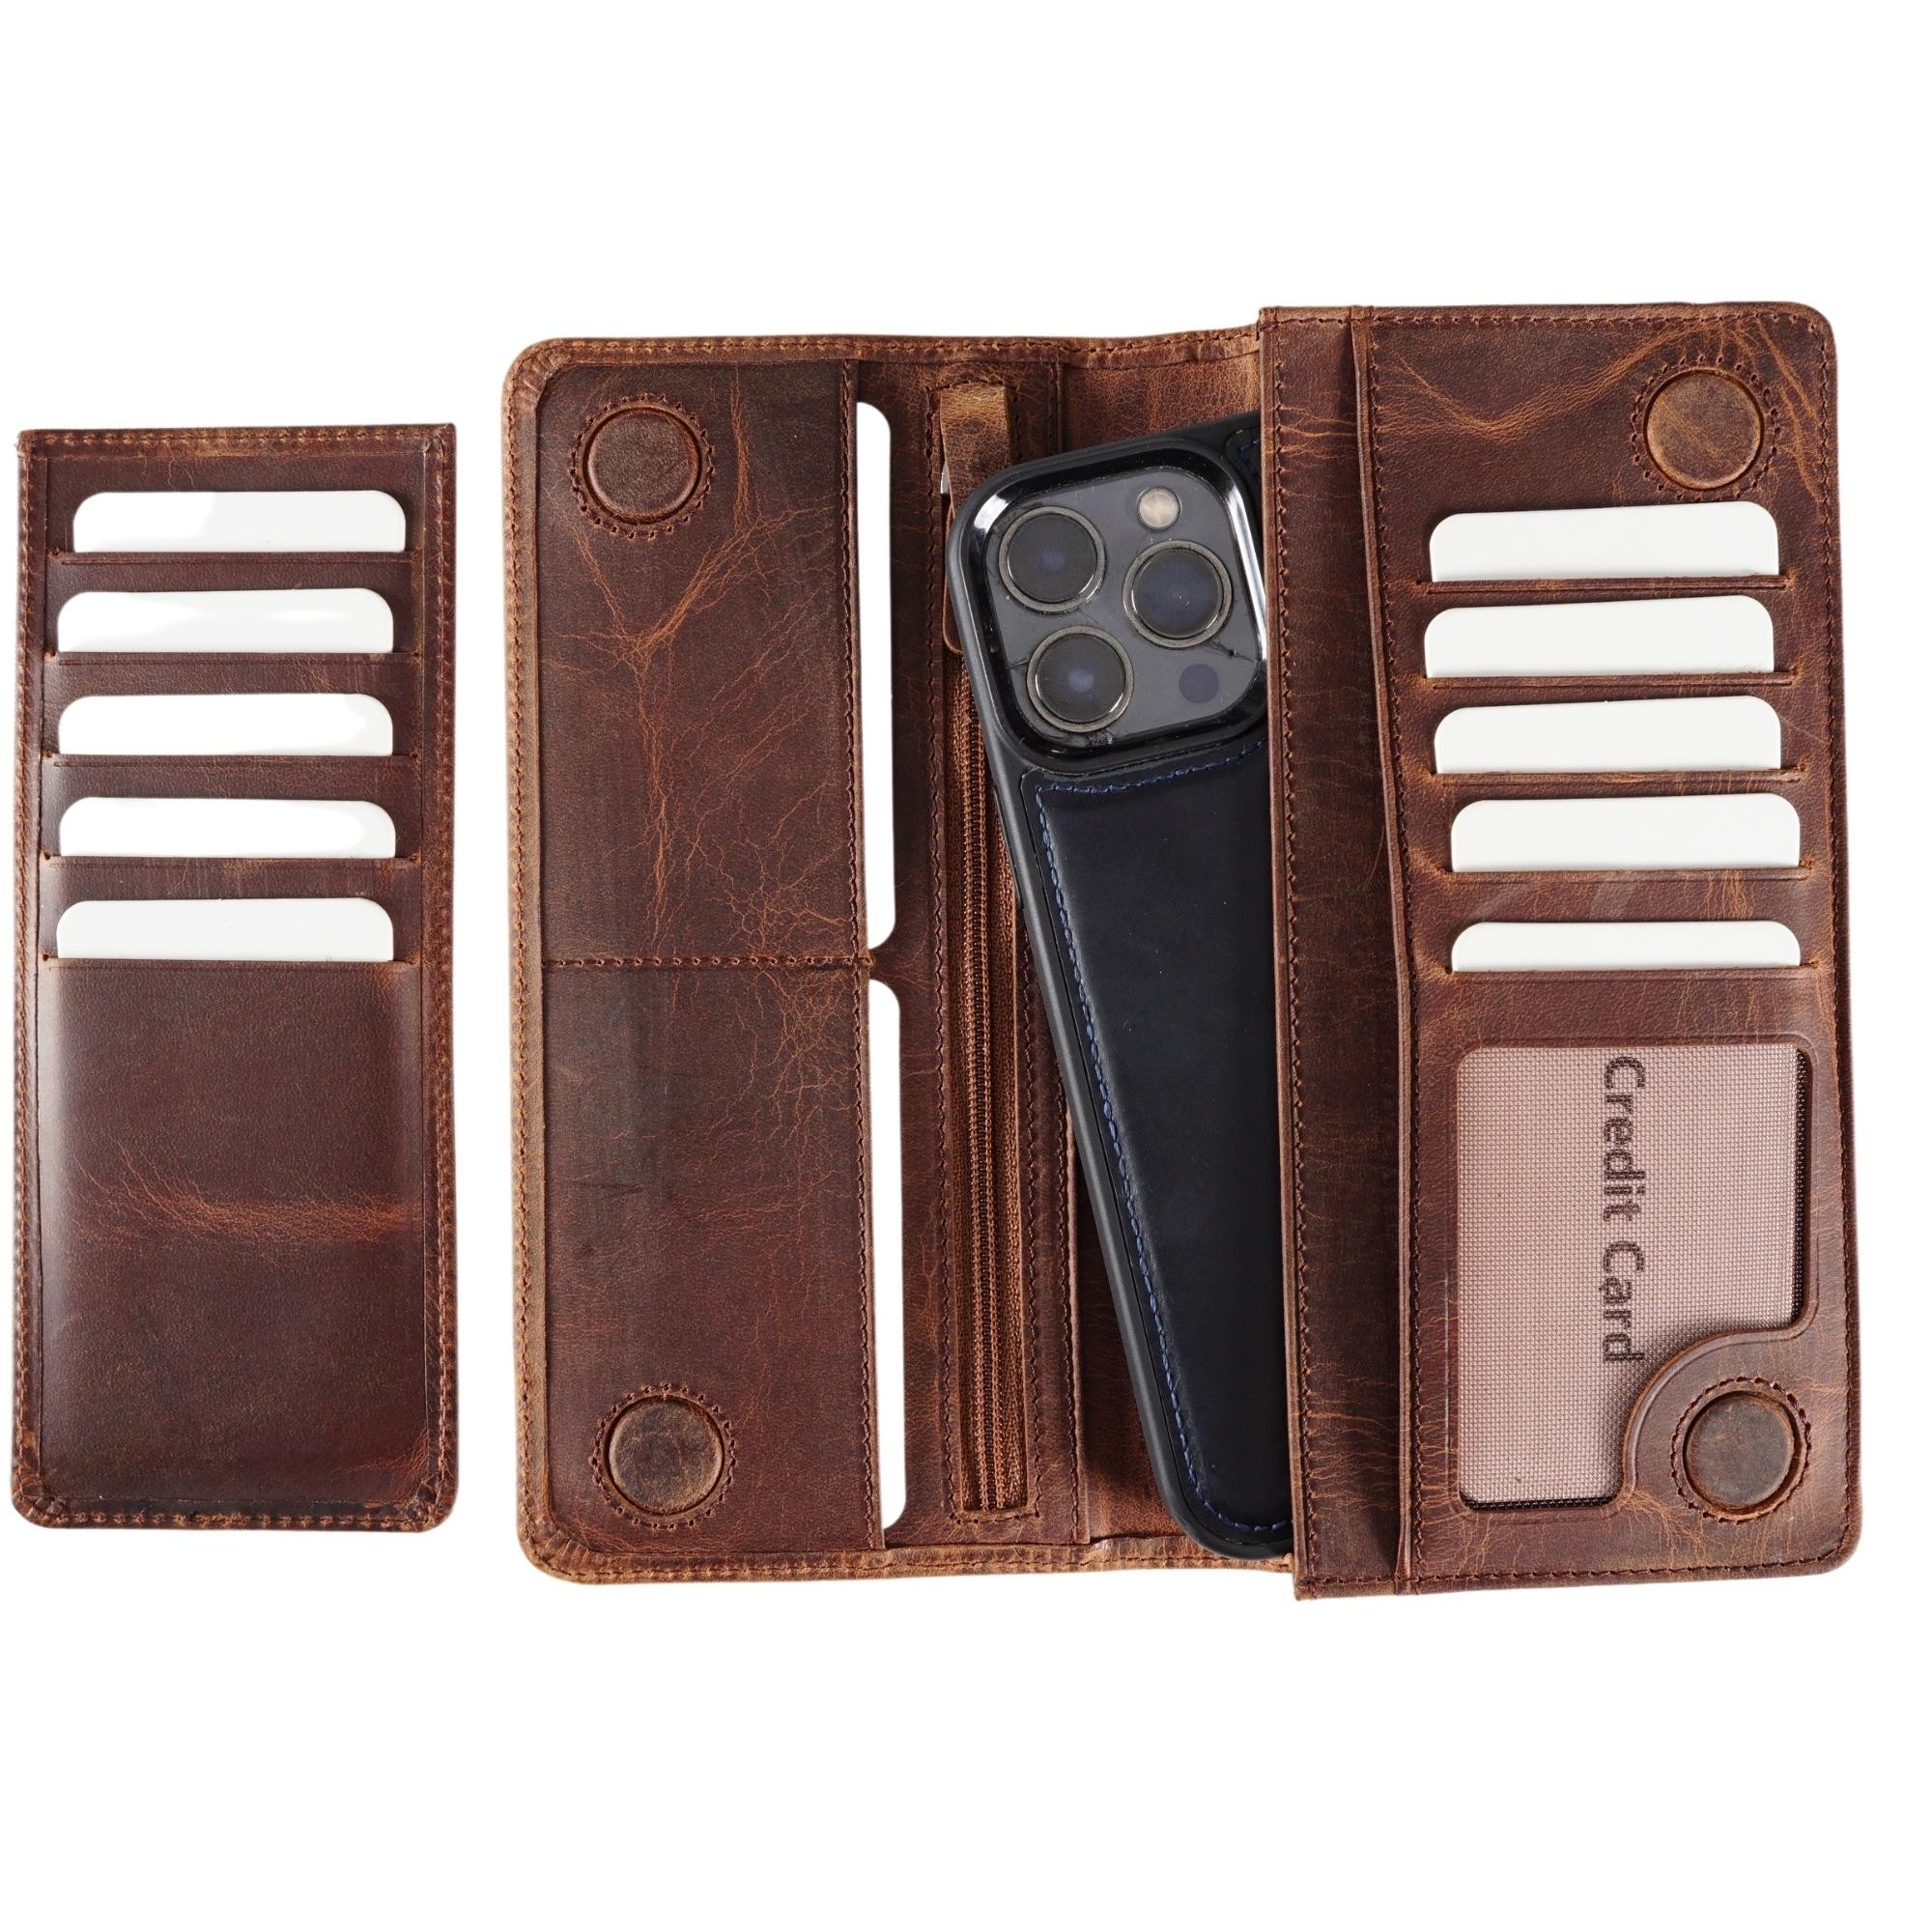 Genuine Leather Wallet with Phone - Brown